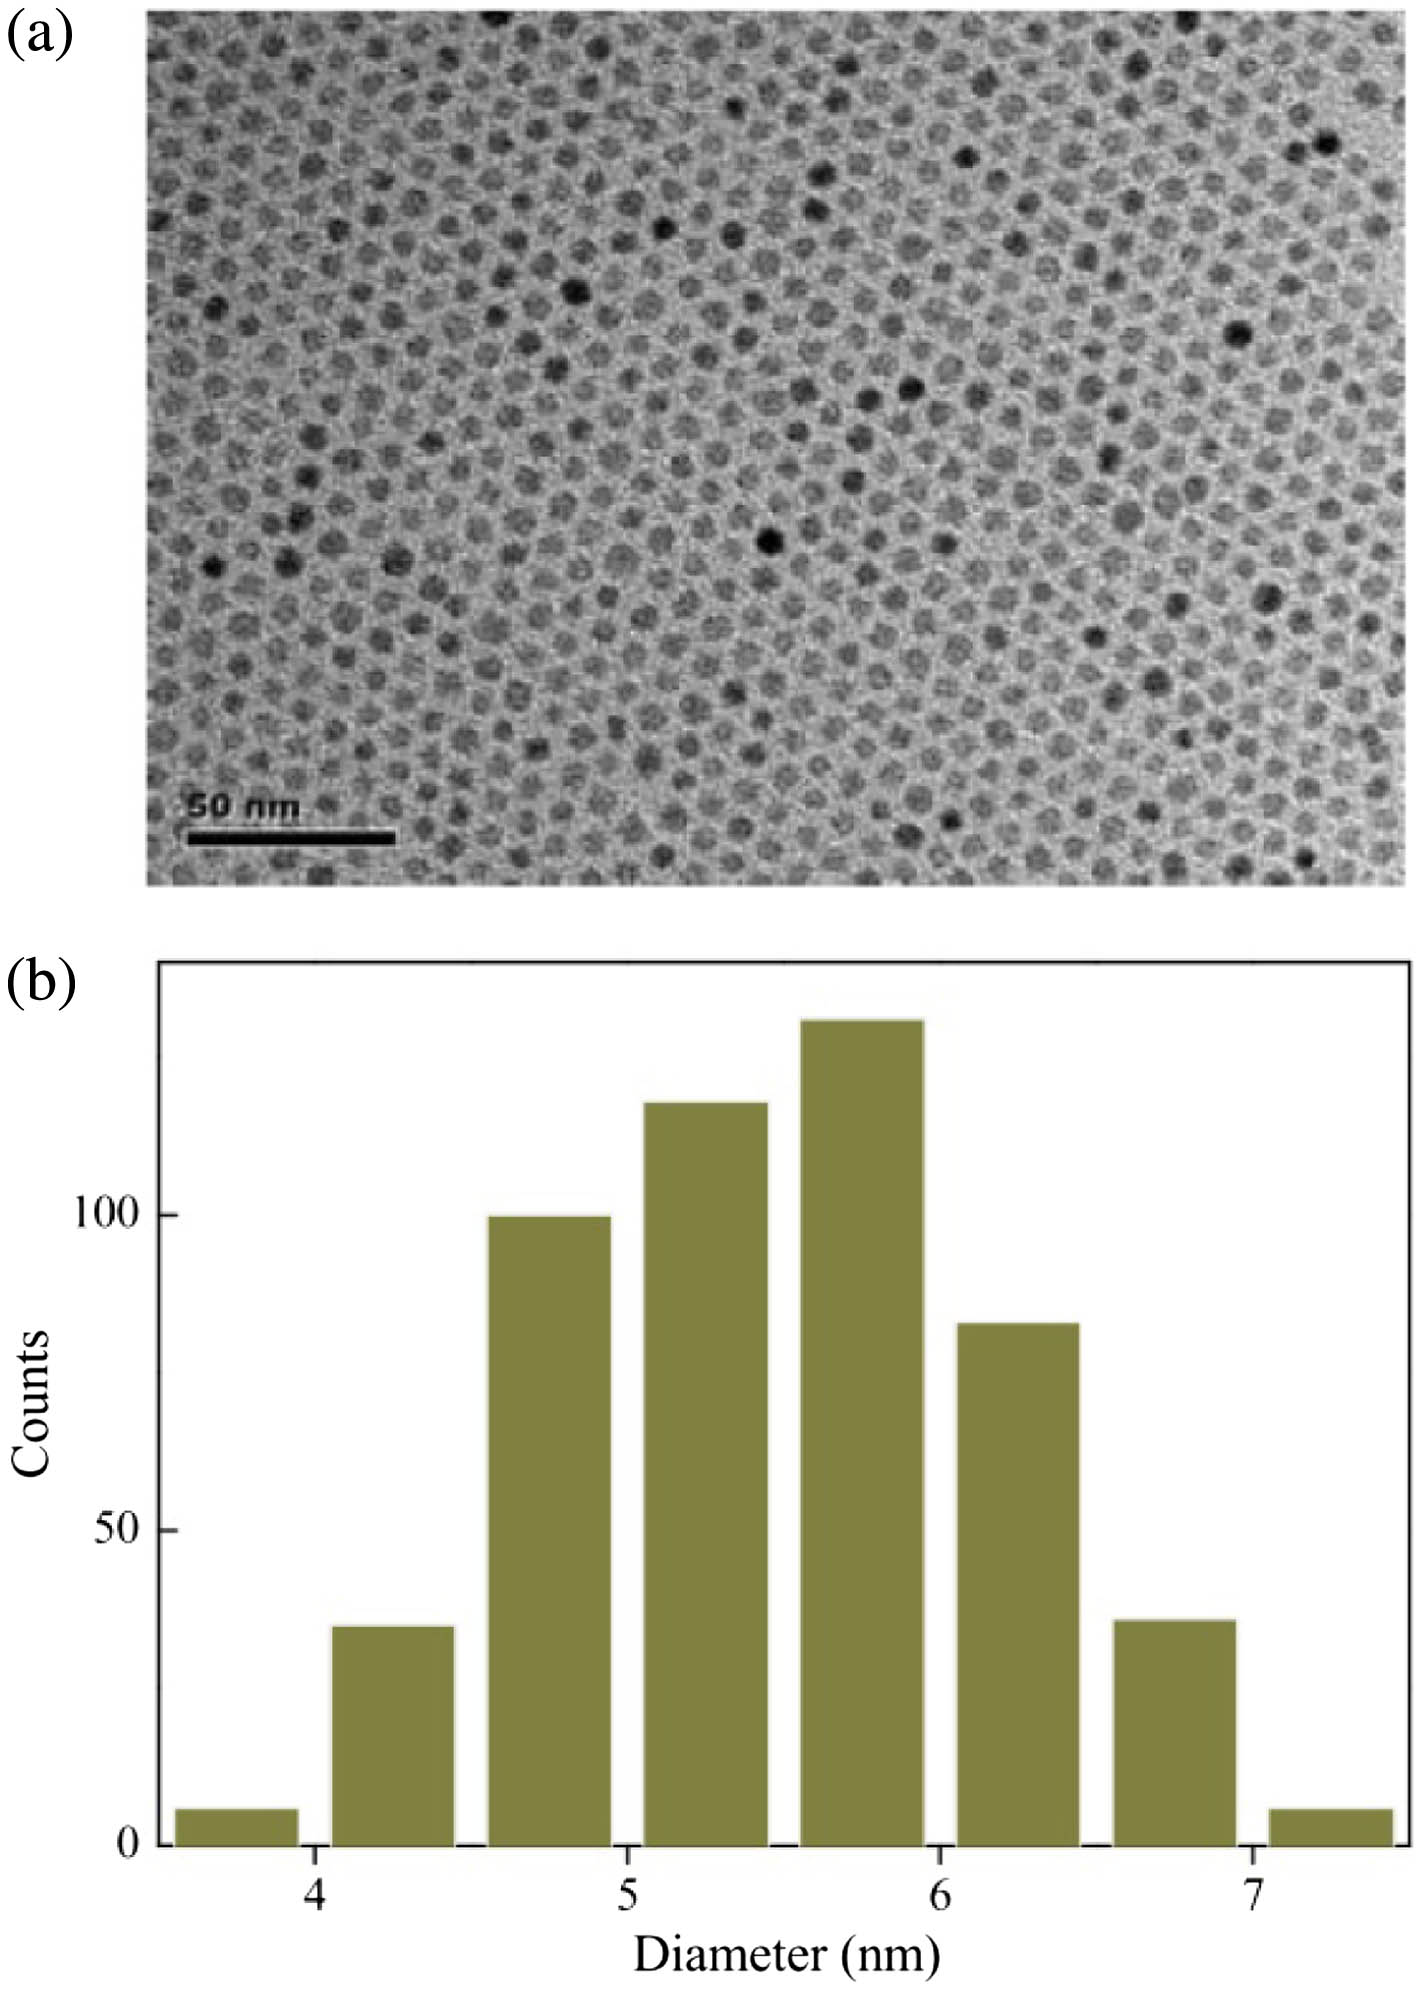 (a) TEM image and (b) corresponding size distribution histogram of PbS QDs.